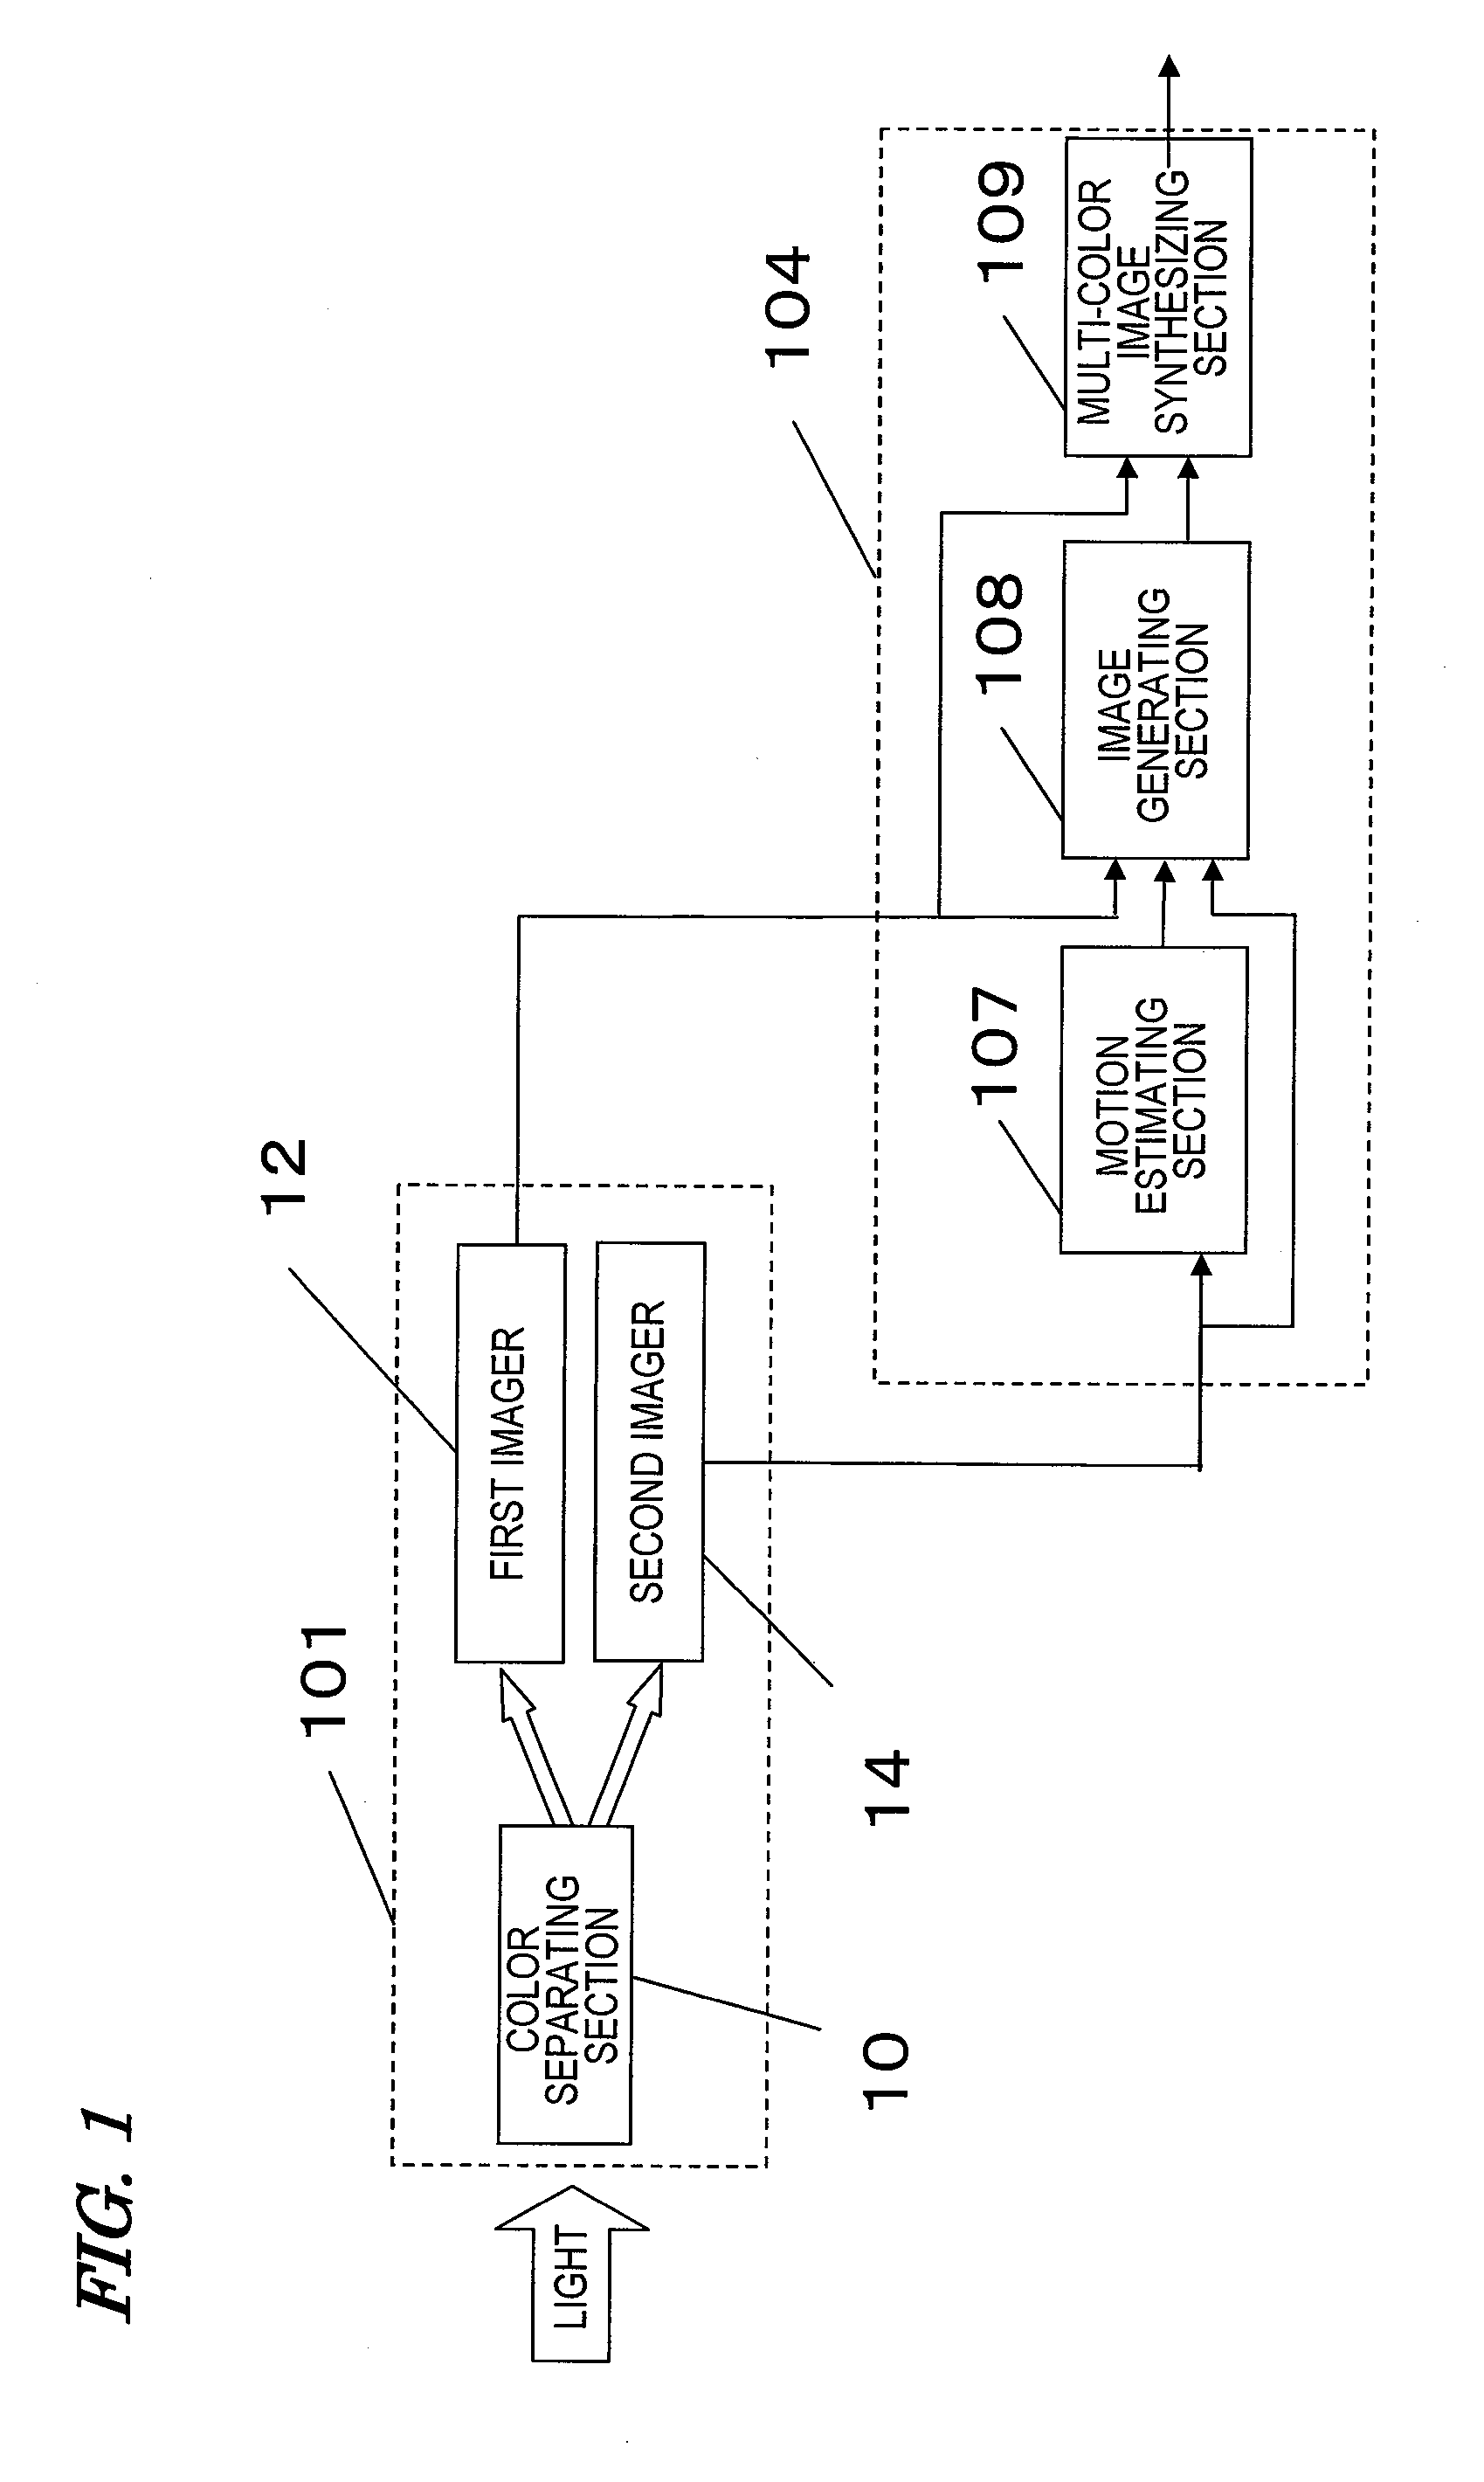 Multi-color image processing apparatus and signal processing apparatus